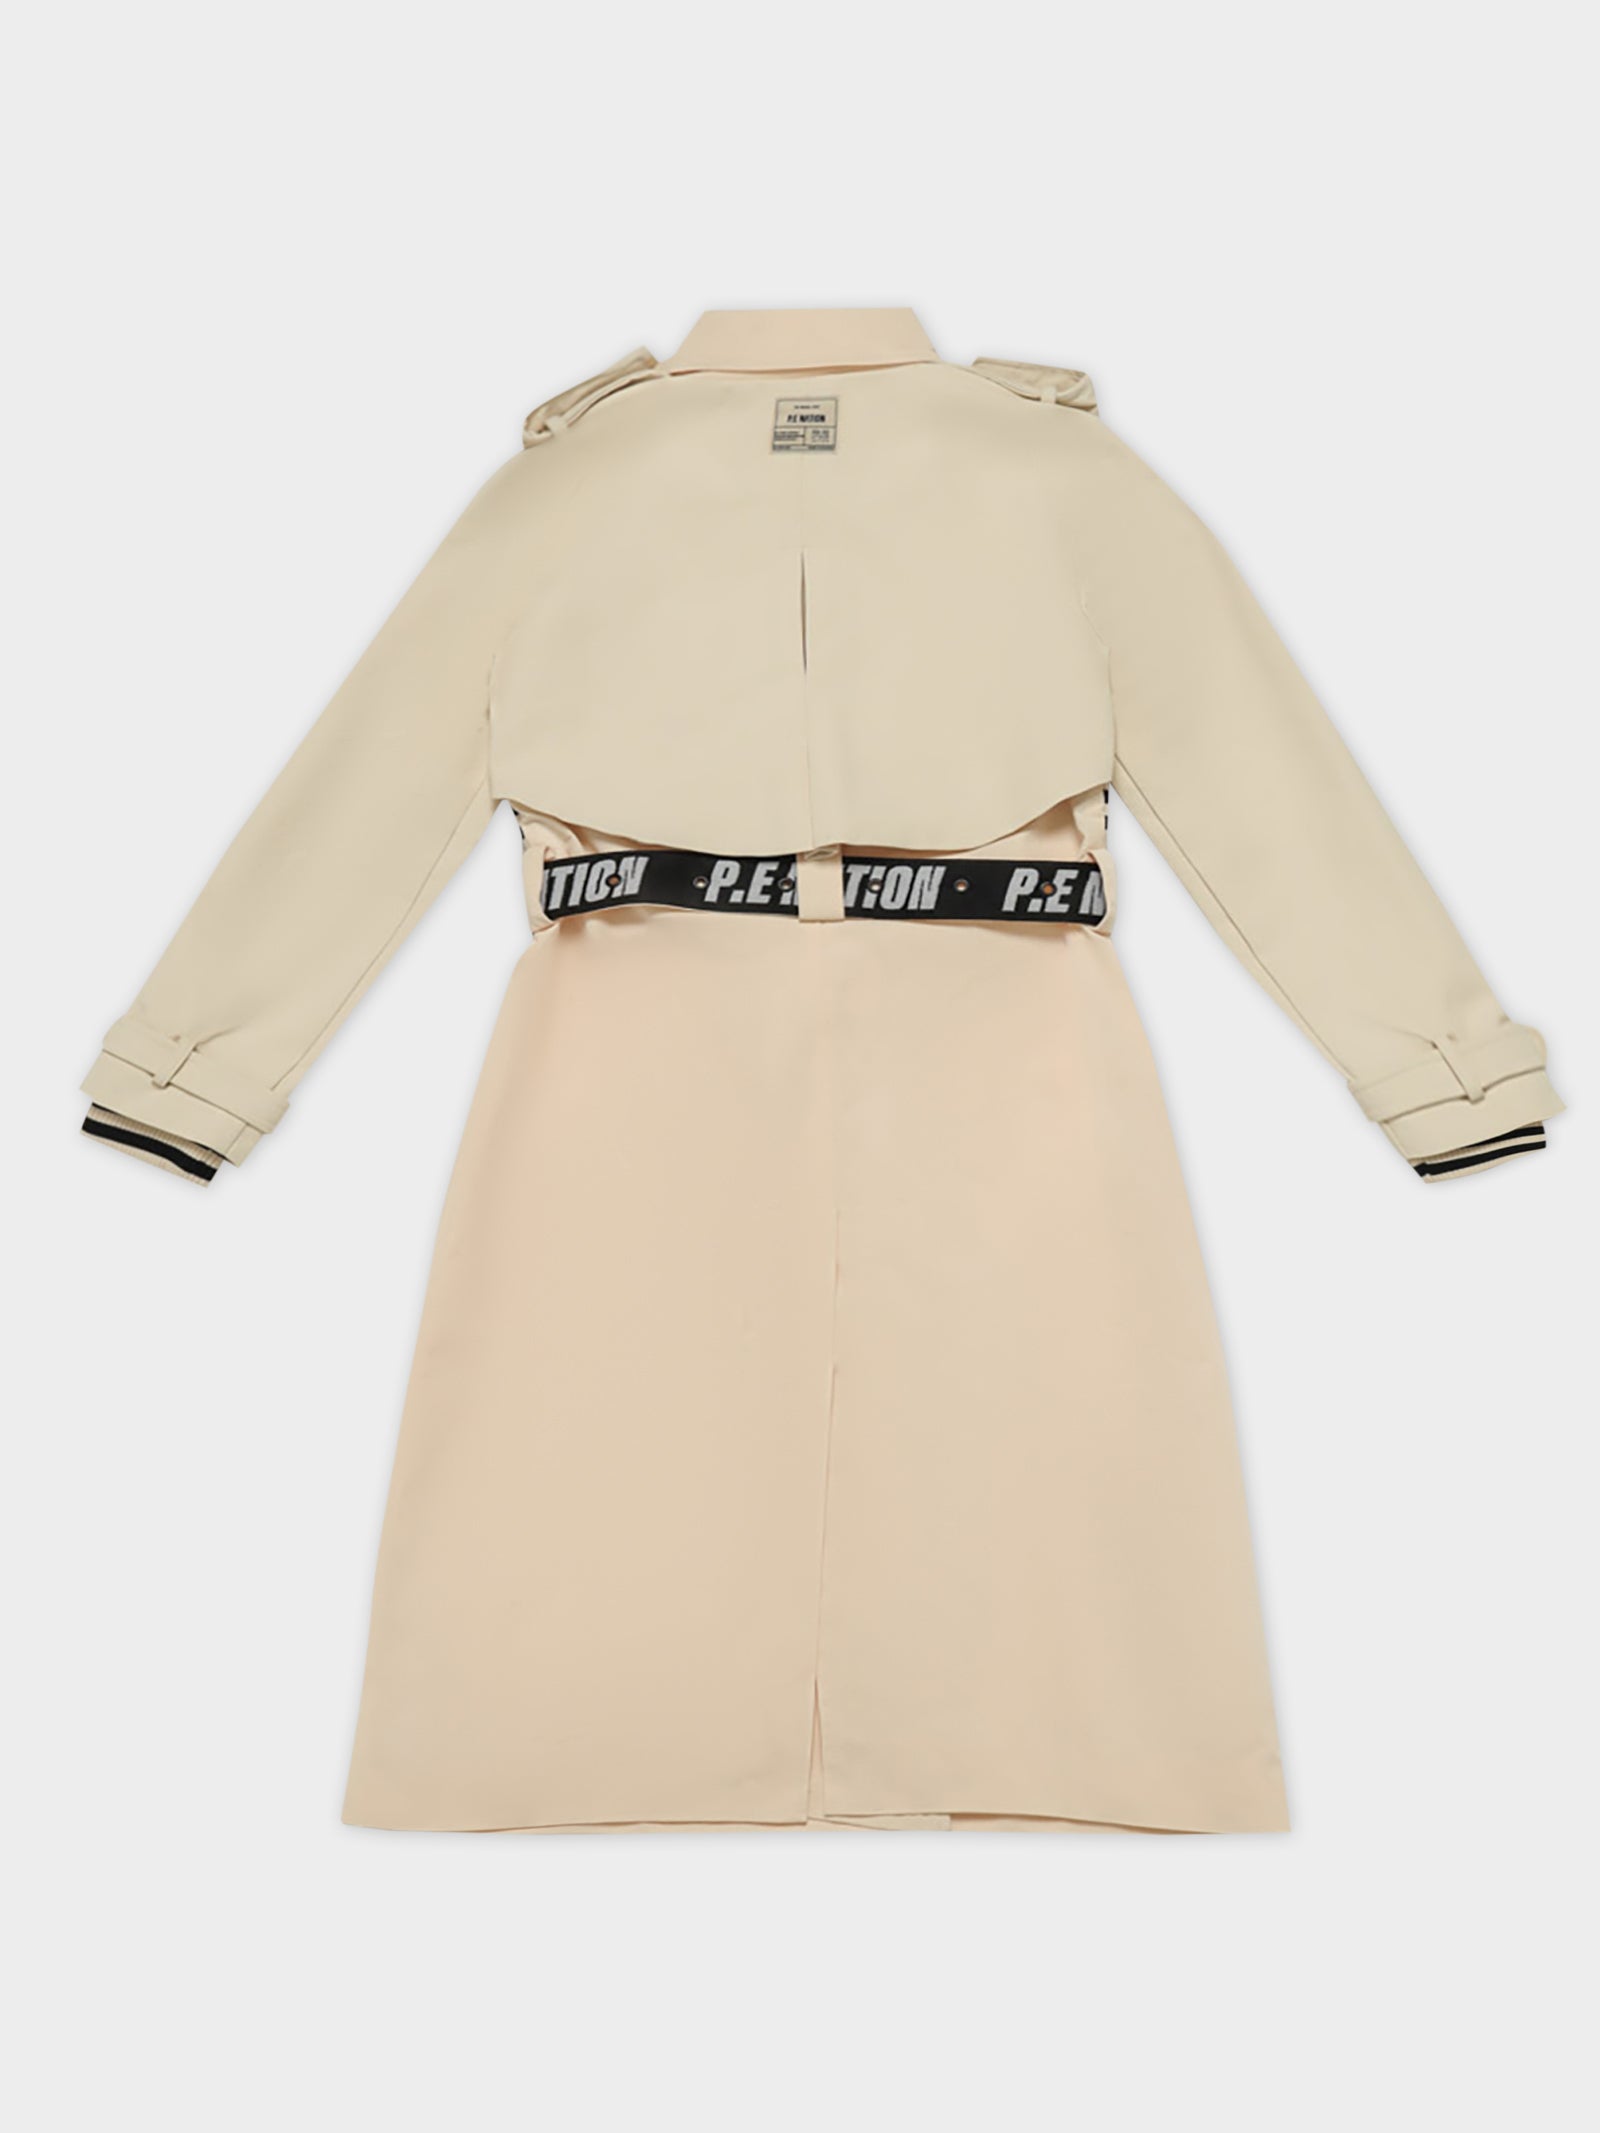 District Trench Coat in Pearled Ivory